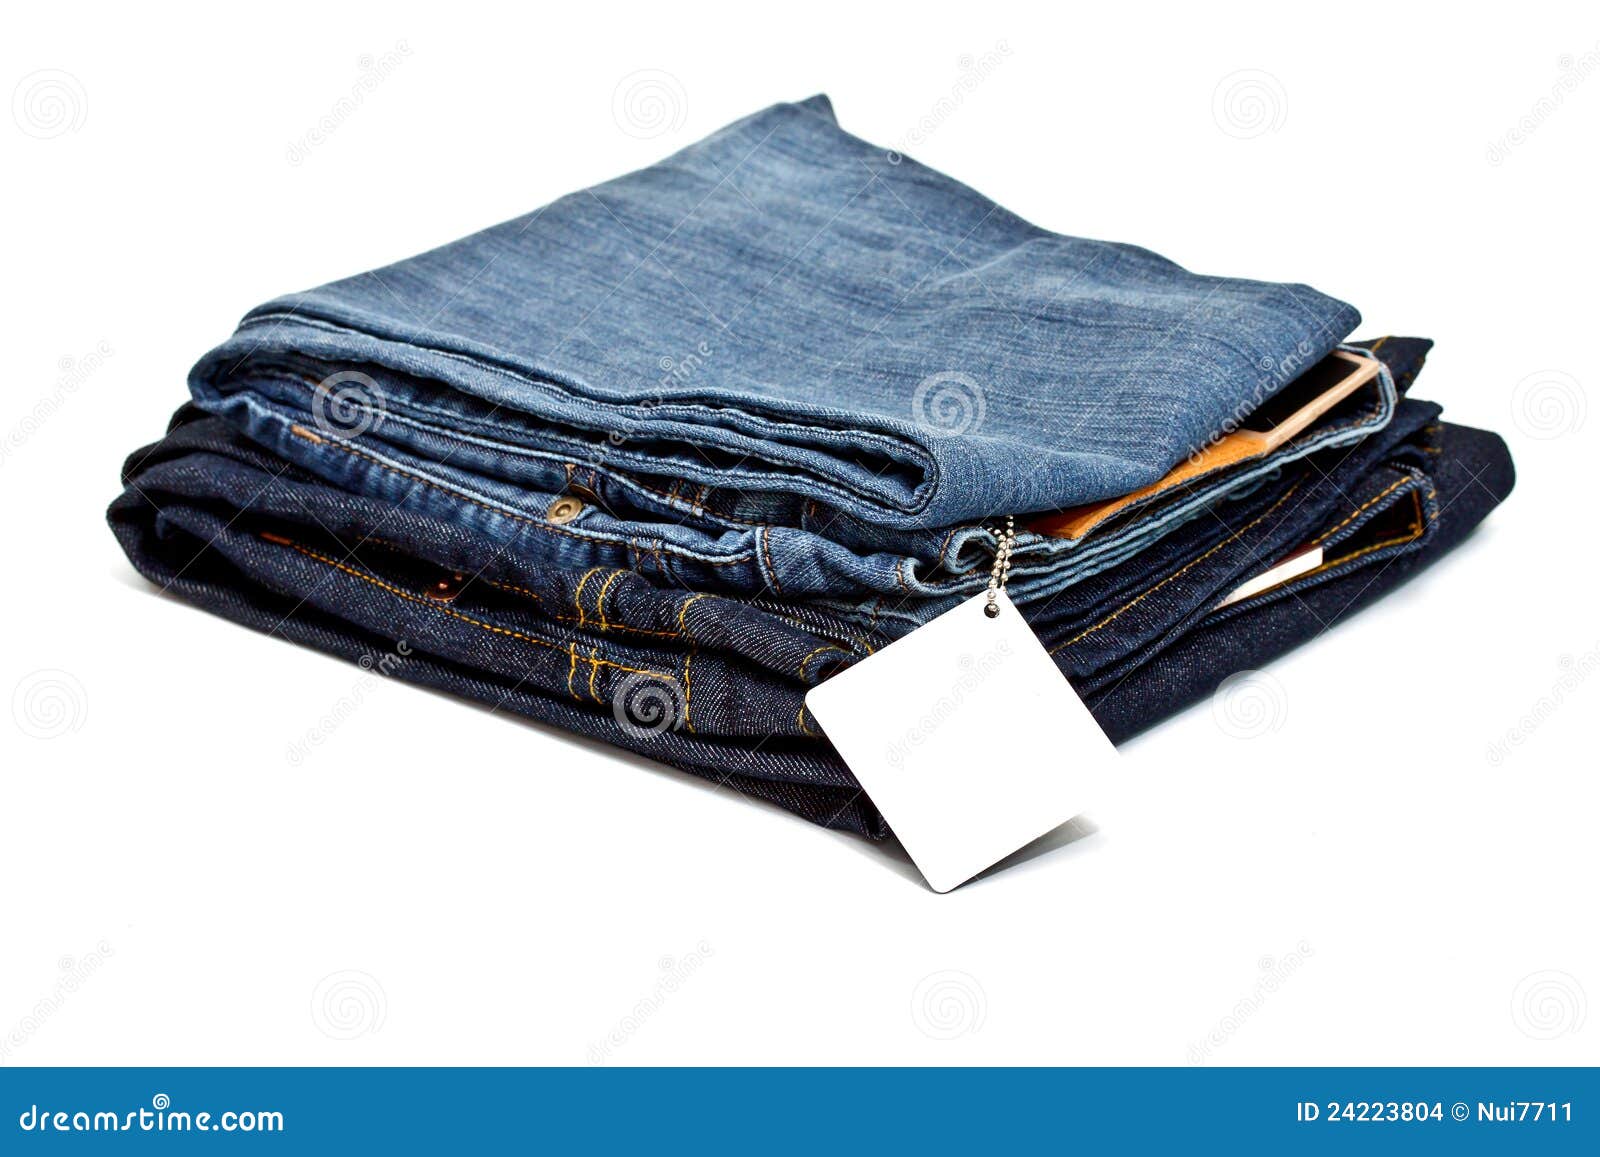 Blue jeans with blank tag stock photo. Image of denim - 24223804